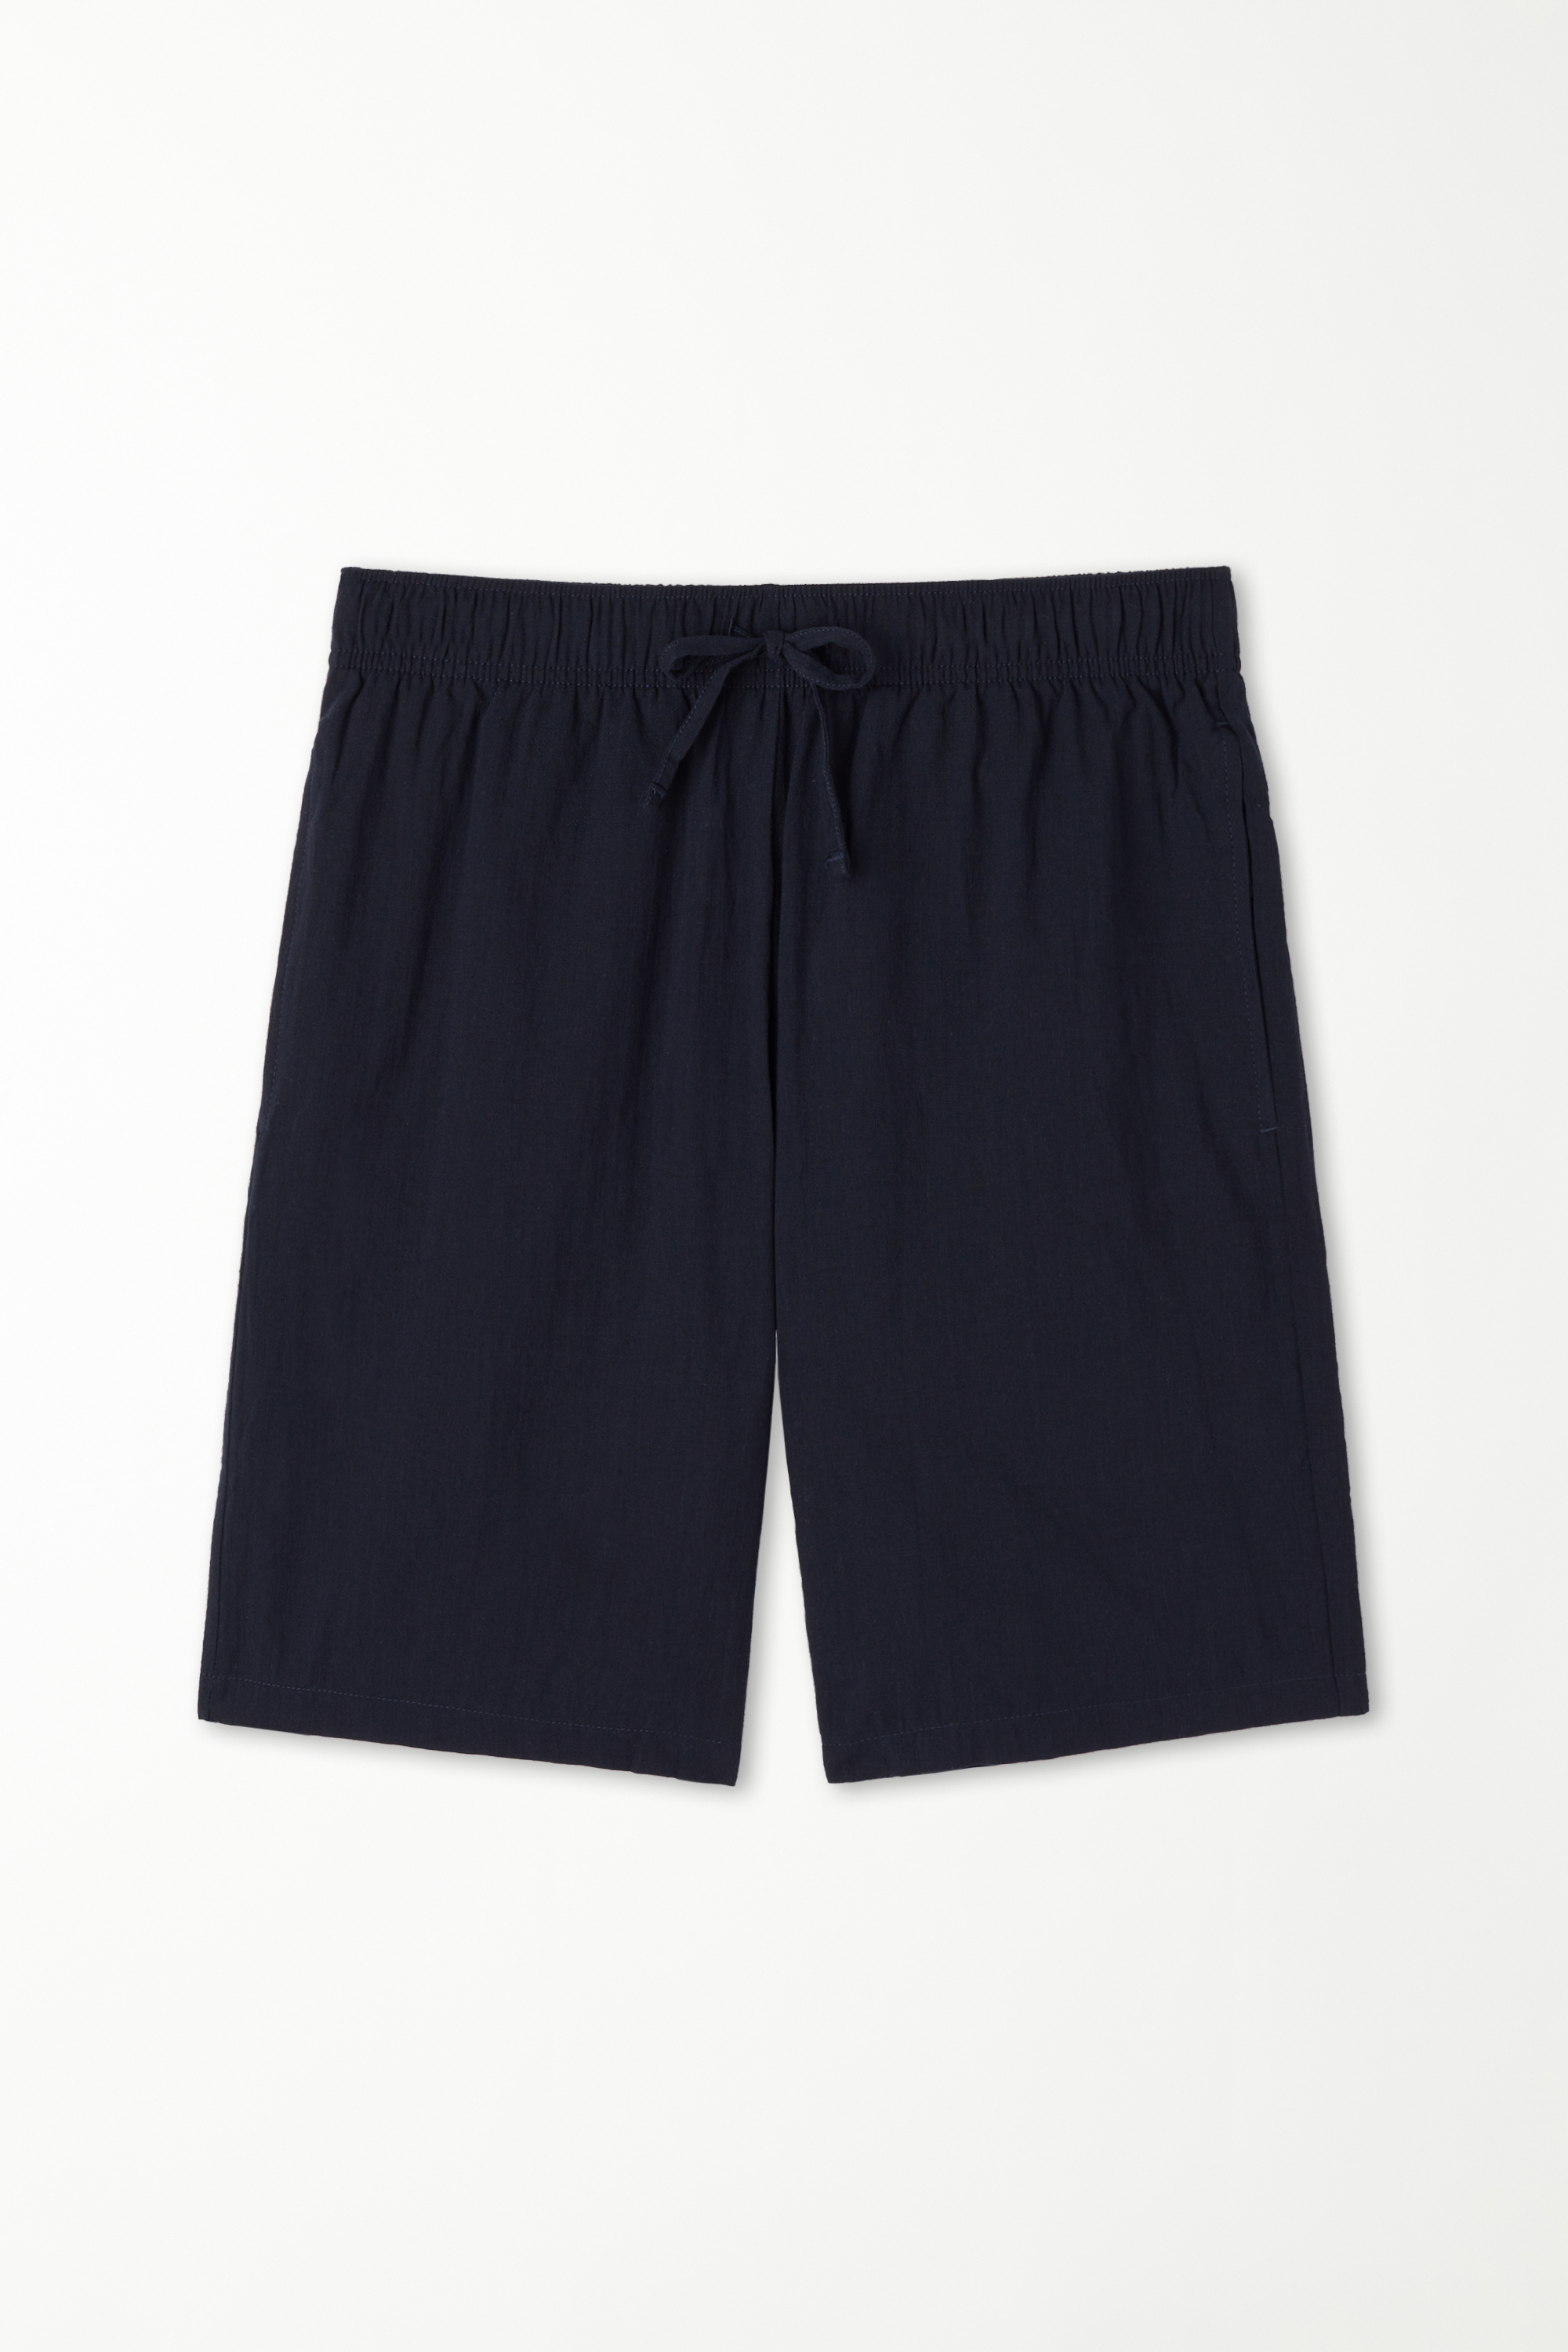 Super Light Cotton Shorts with Pockets